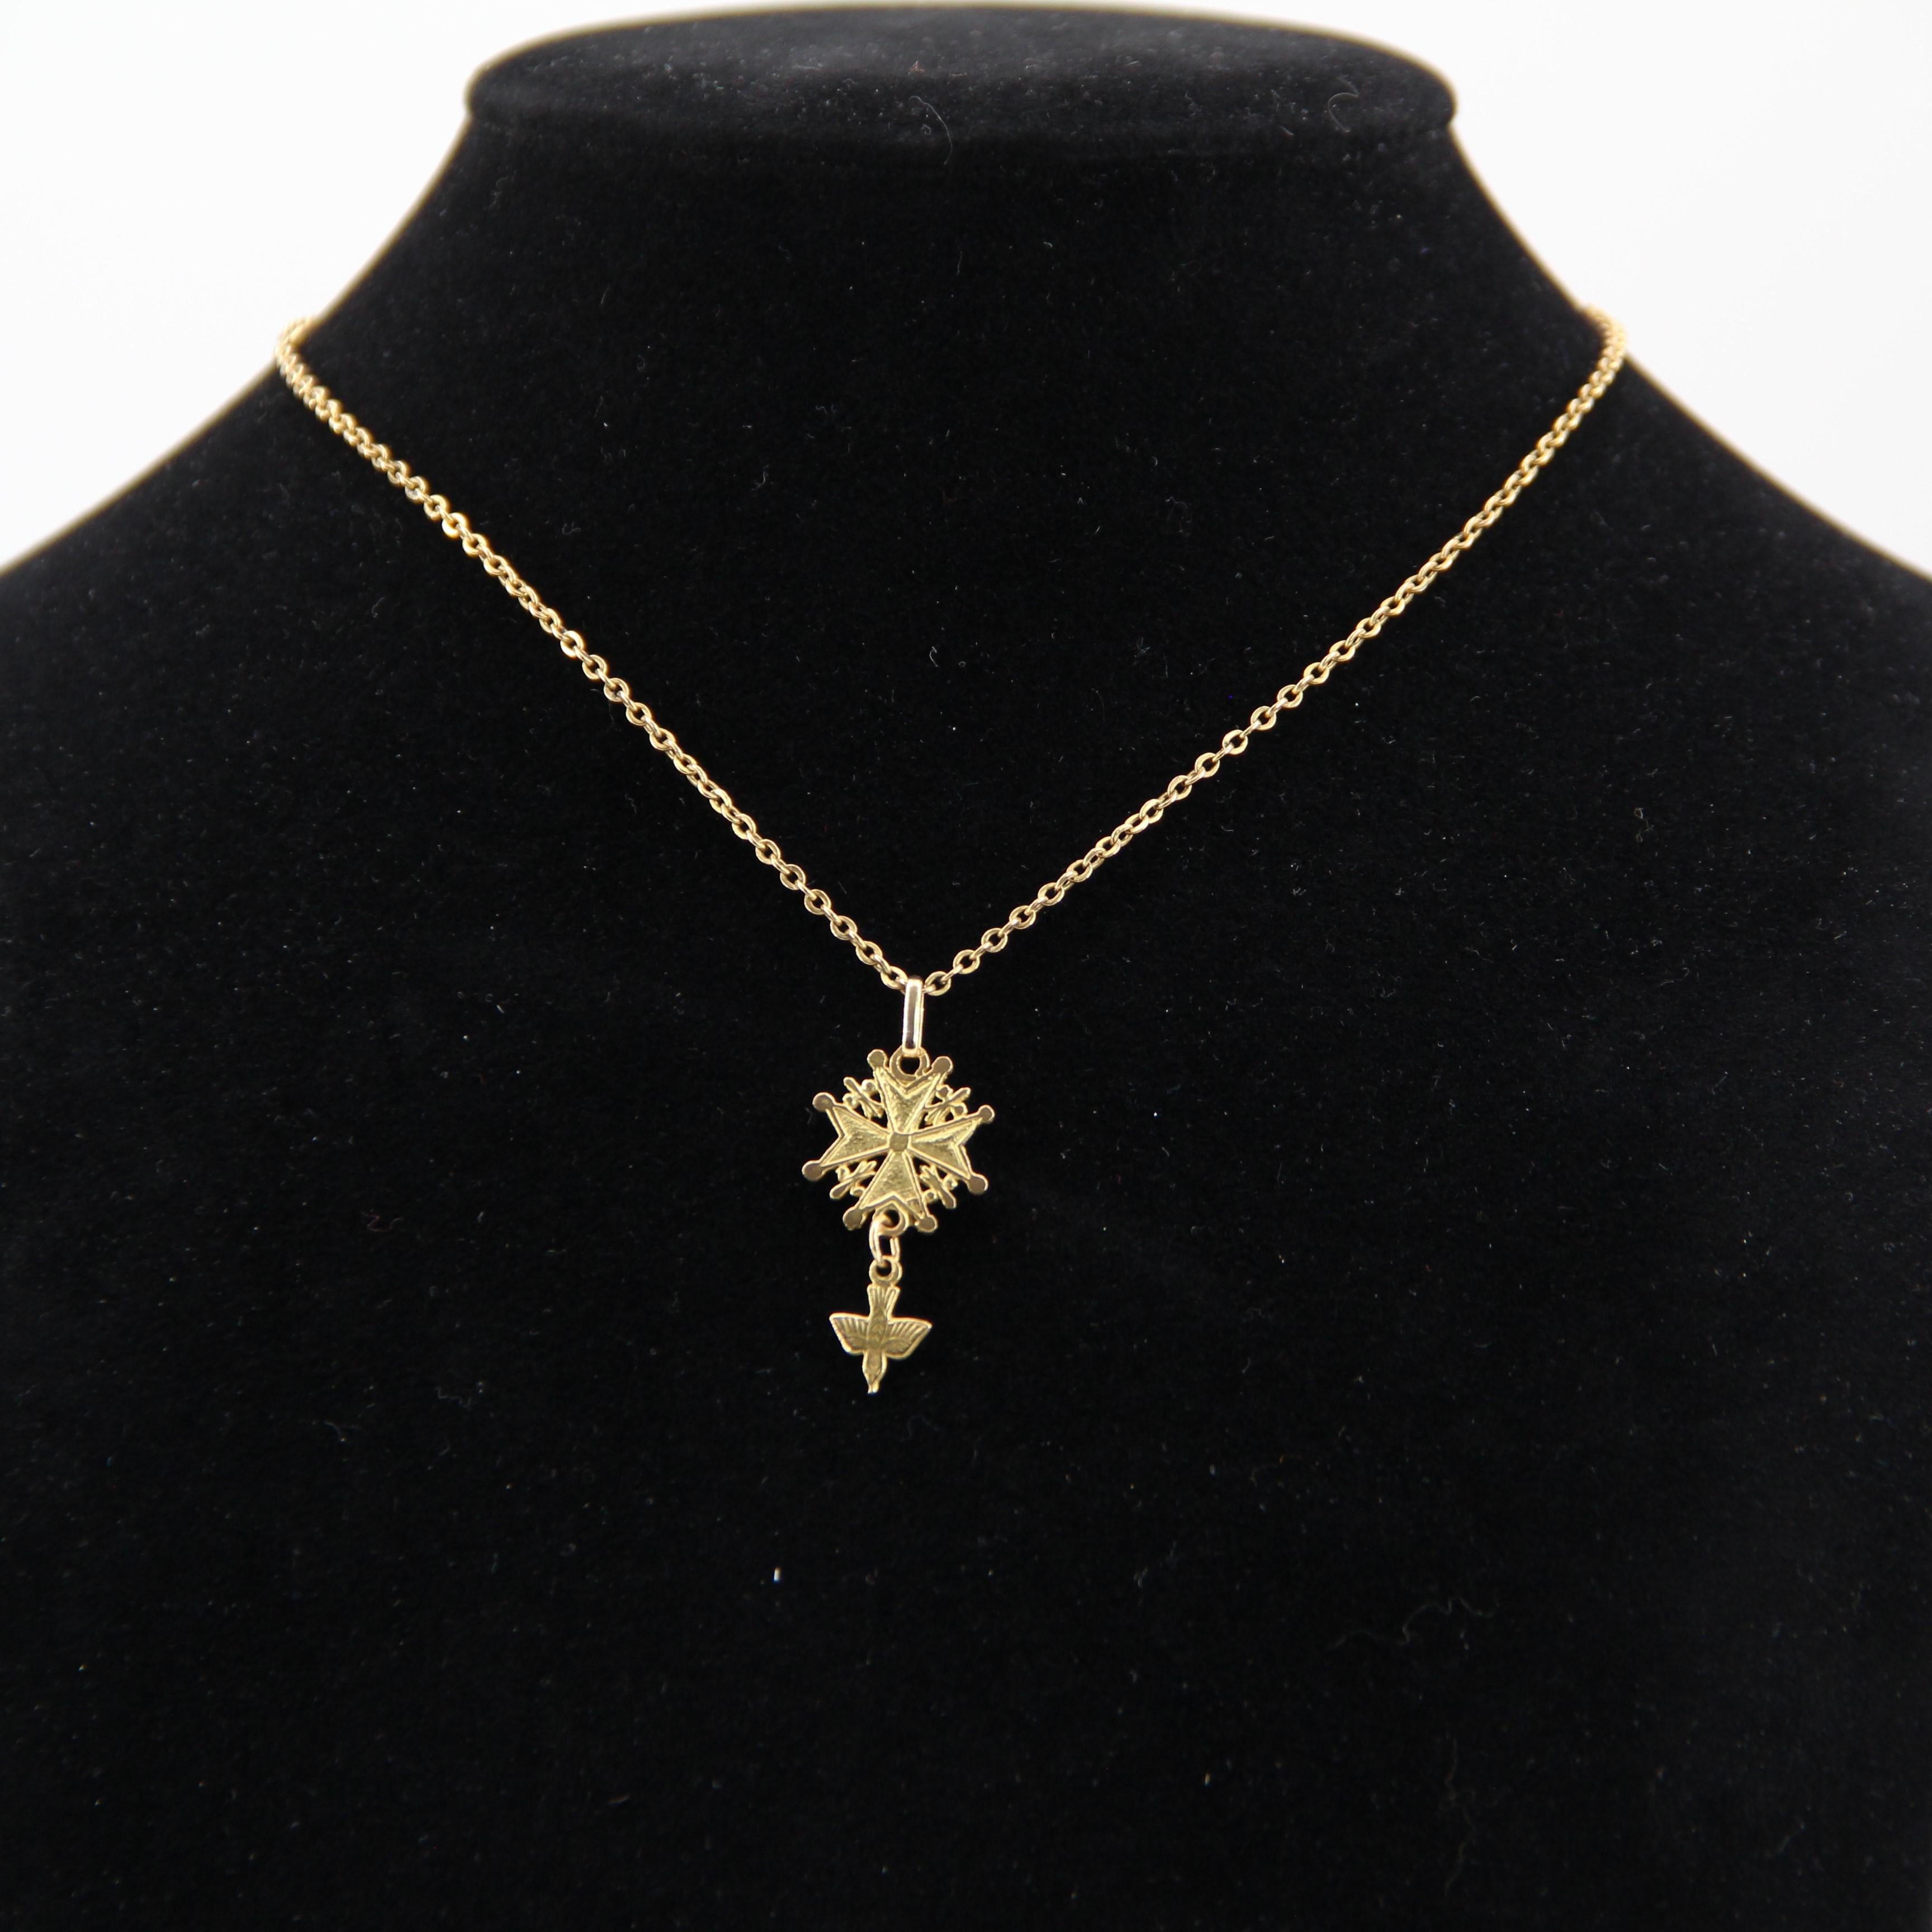 Pendant in 18 karat yellow gold.
This antique pendant represents a cross of Occitania which holds in pampille a dove.
Height : 3,4 cm, width : 1,3 cm, thickness : 0,7 mm approximately.
Total weight of the jewel : 2 g approximately.
Authentic retro